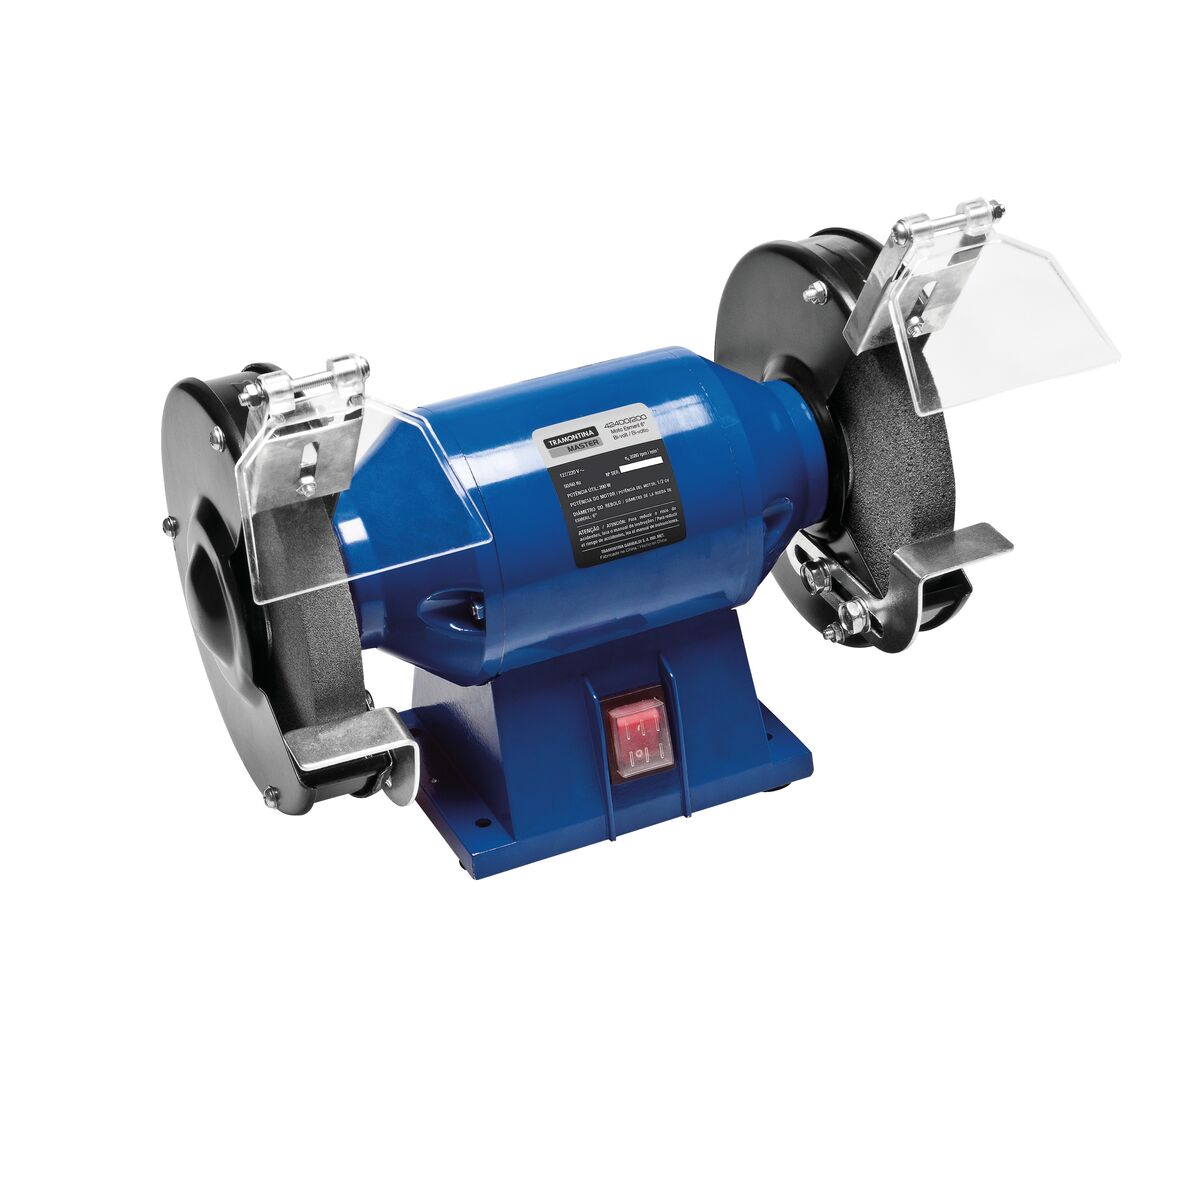 Tramontina MASTER 368 W 6" Bench Grinder Dual Voltage for Professional Use